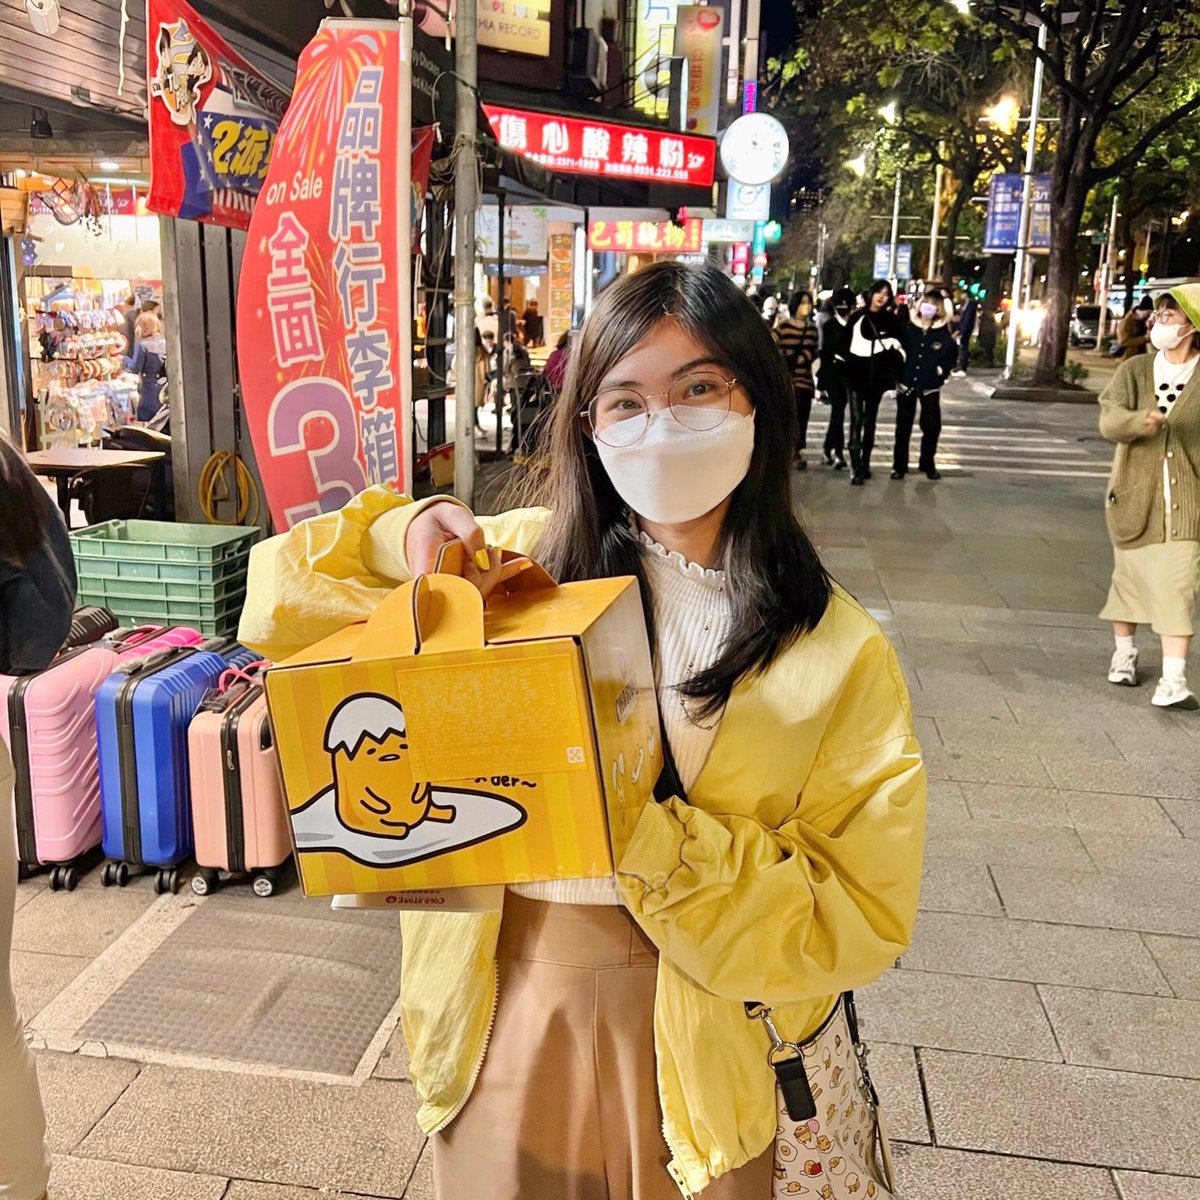 Coldstone x Gudetama party ice cream cake from Taiwan 💛

So happy I was able to purchase this cake 🥰 The flavors: mango and strawberry ice cream with mochi and fruits, yum 😋 It’s very sweet ✨ I kept the box for souvenir 😆

#gudetama #ぐでたま #蛋黃哥